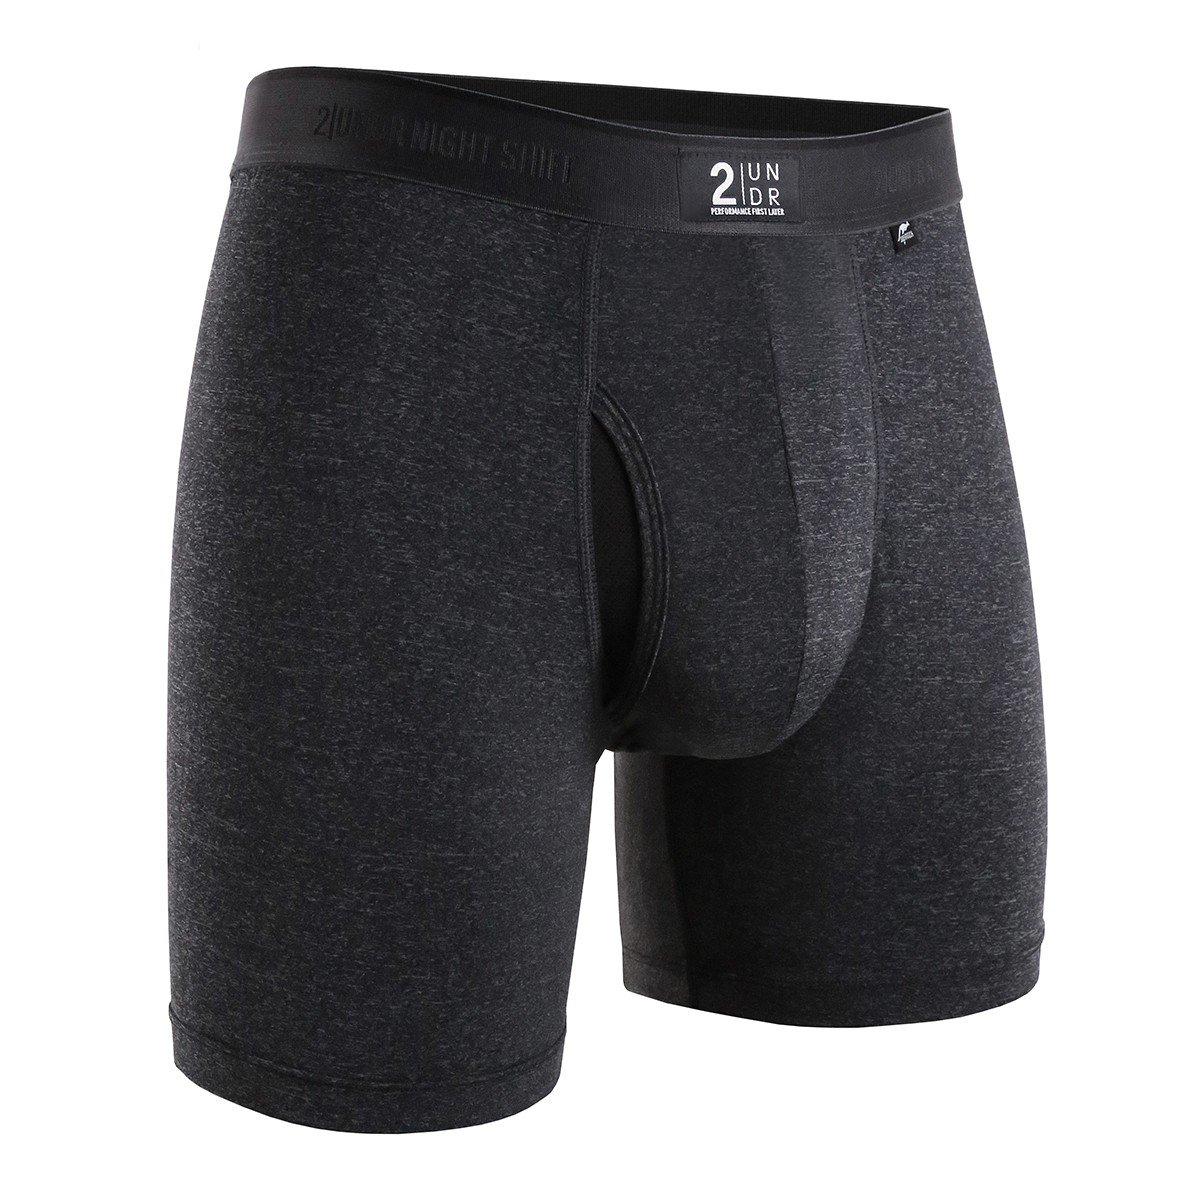 mens boxer briefs with pouch